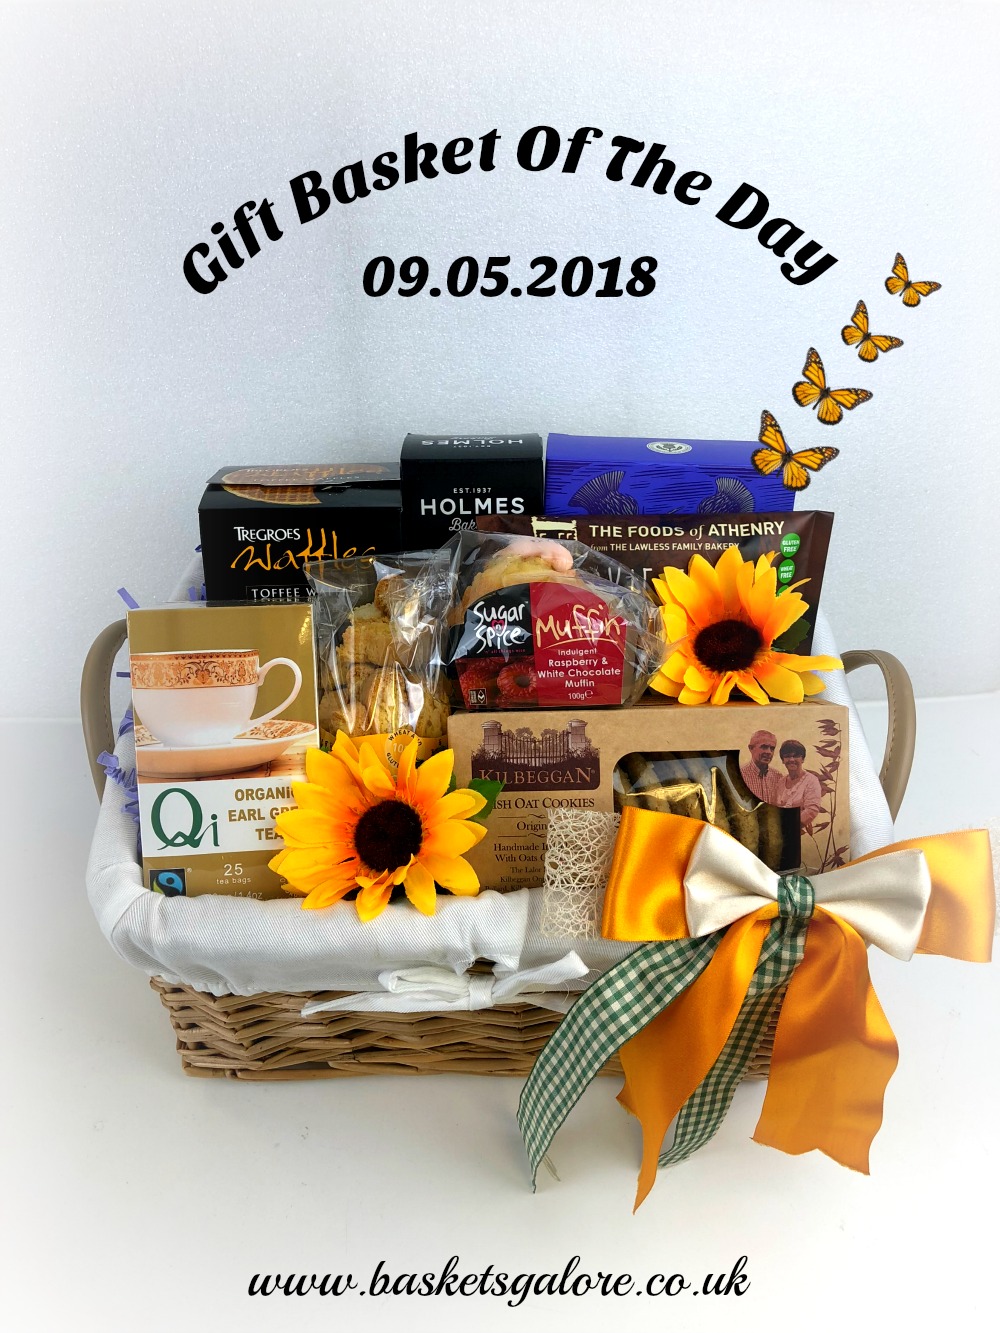 Baskets Galore’s Customer Gifts – Gift Basket of the Day 09.05.18